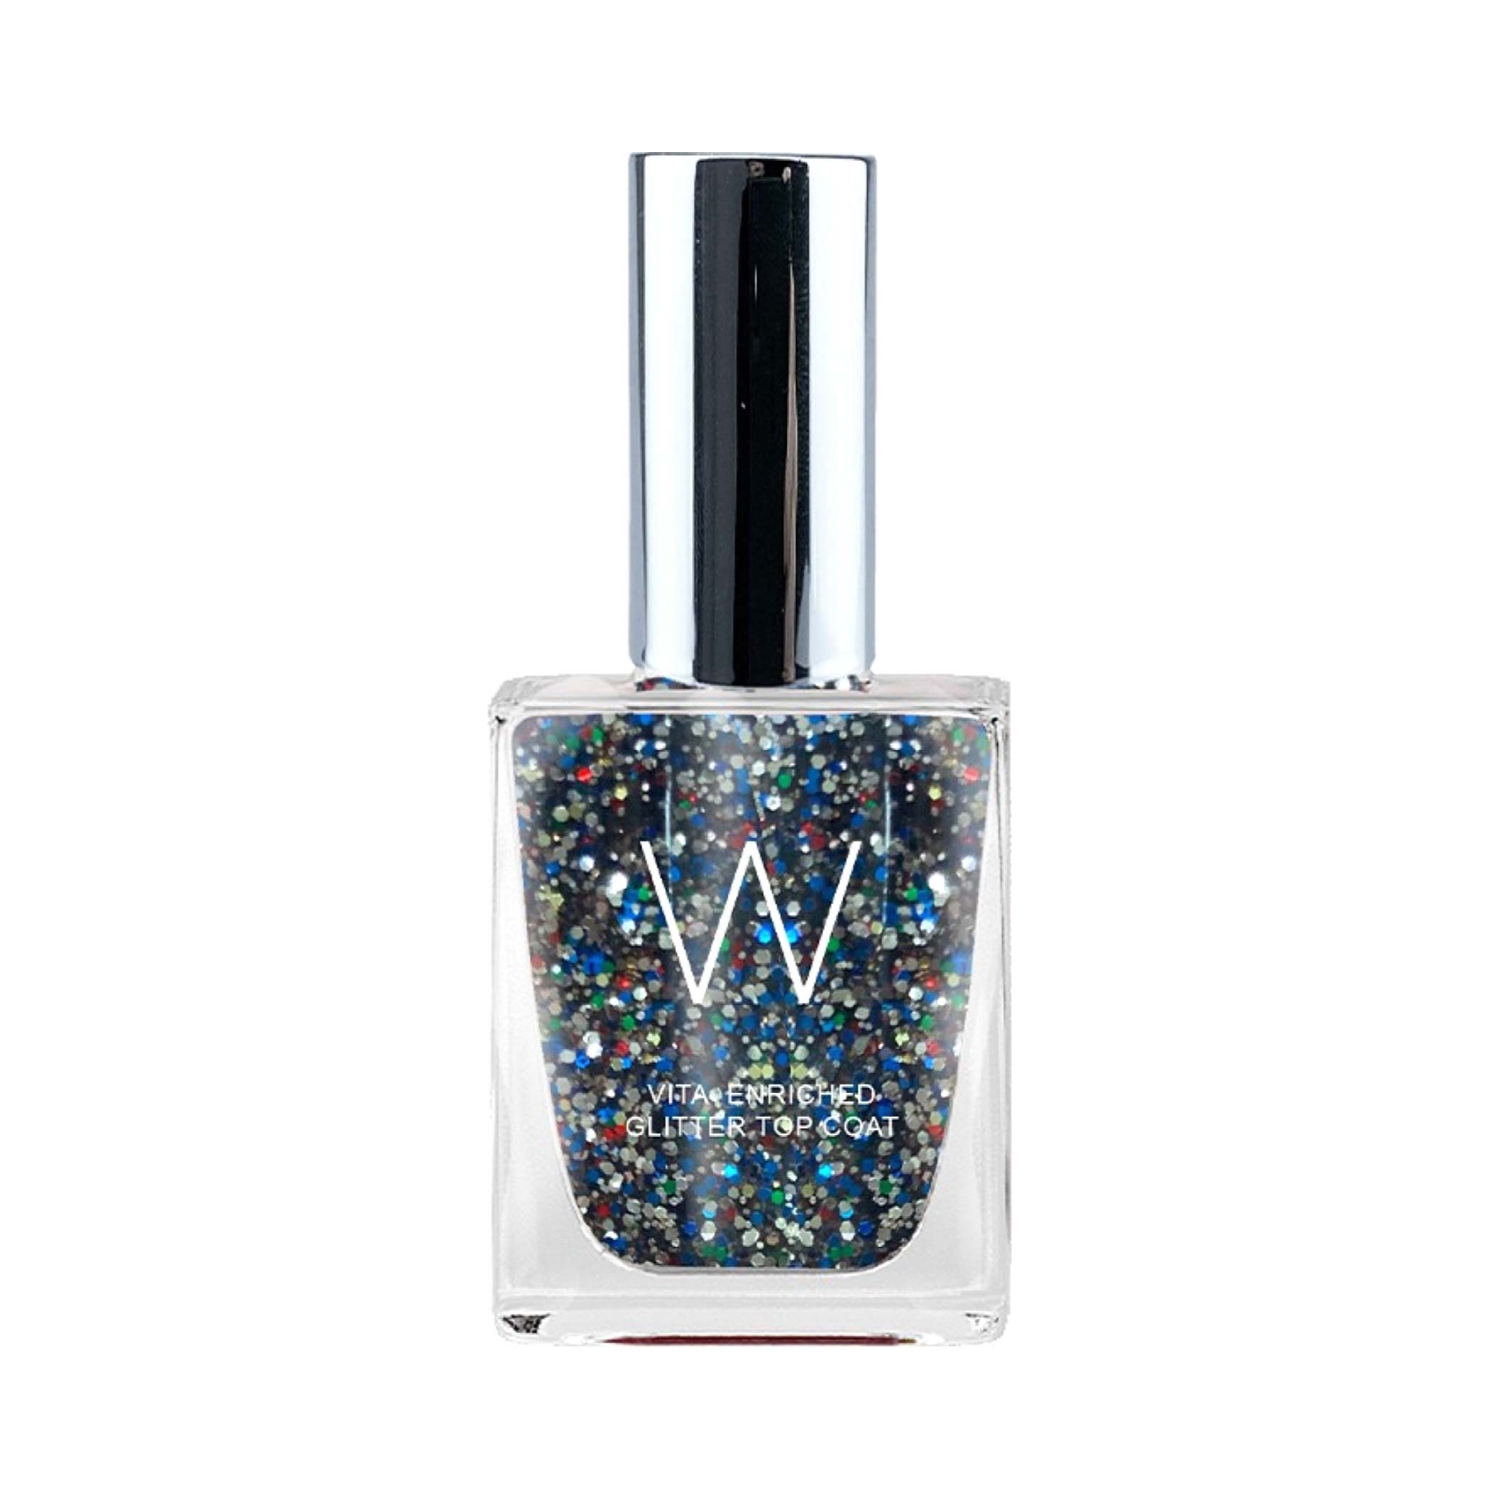 Buy Swiss Beauty SB-MS60 High Shine Glitter Nail Polish Shade 05 - High  Coverage and Shine, Classy Look, Chip-Resistant Formula, Nail Paint Online  at Low Prices in India - Amazon.in